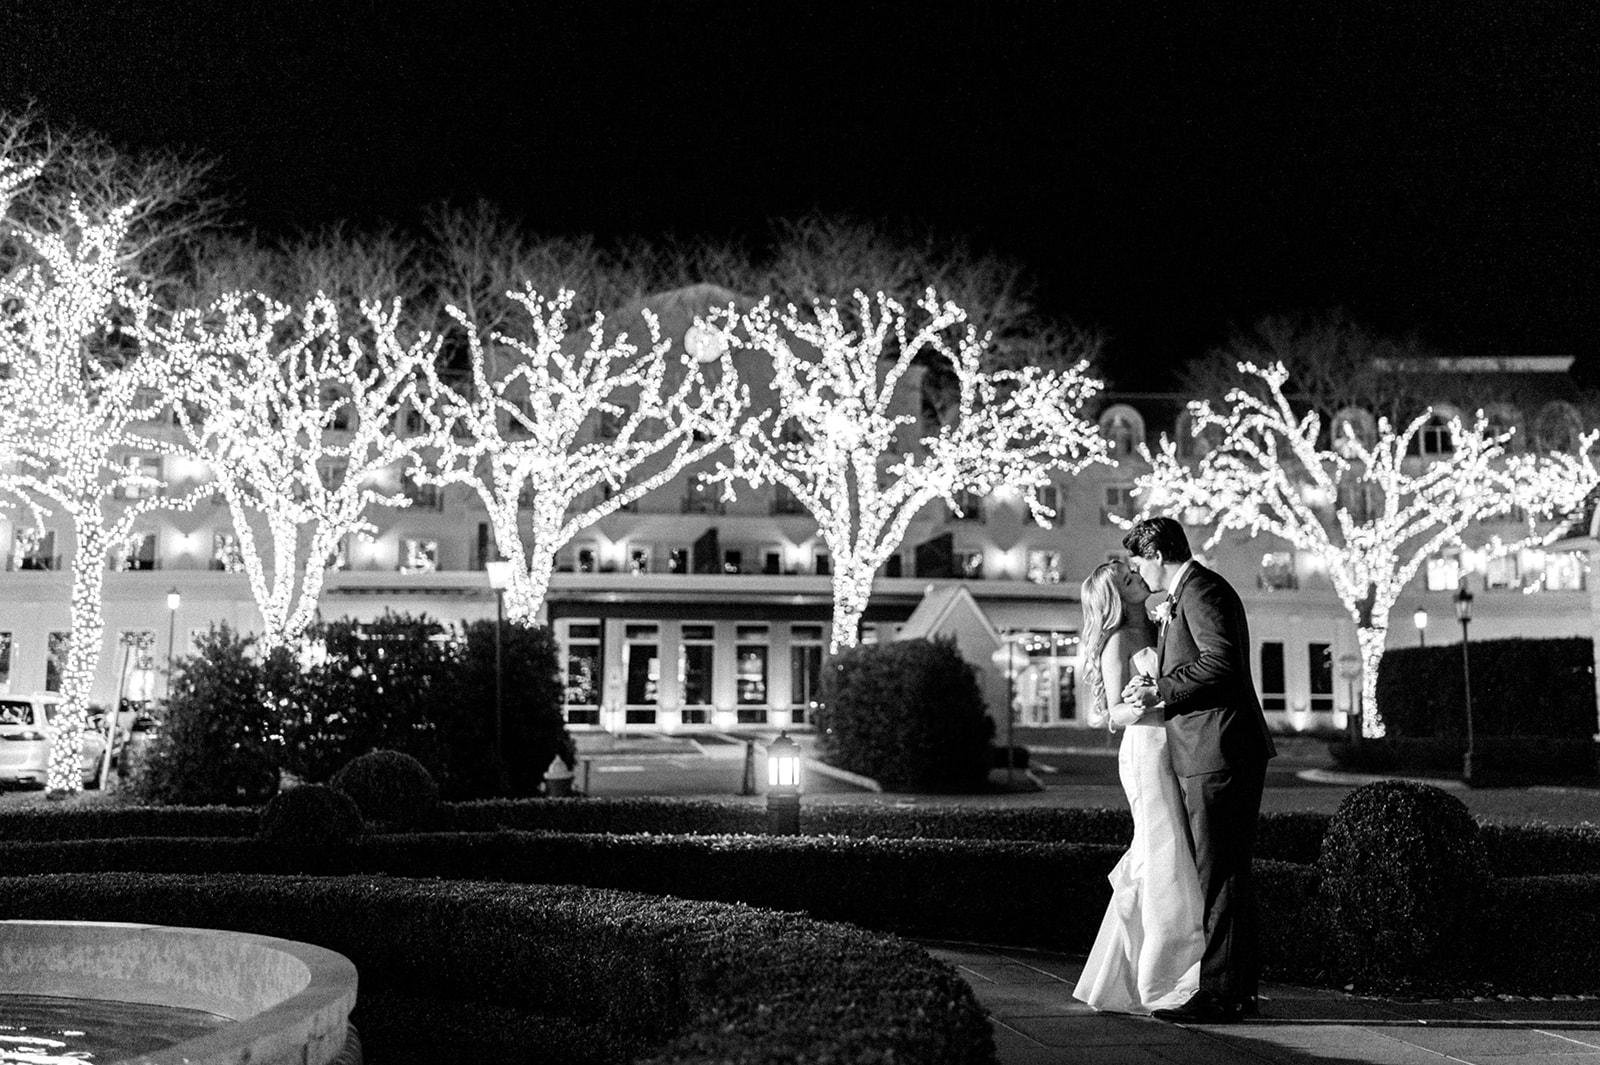 Night photo of bride and groom at Park Chateau wedding